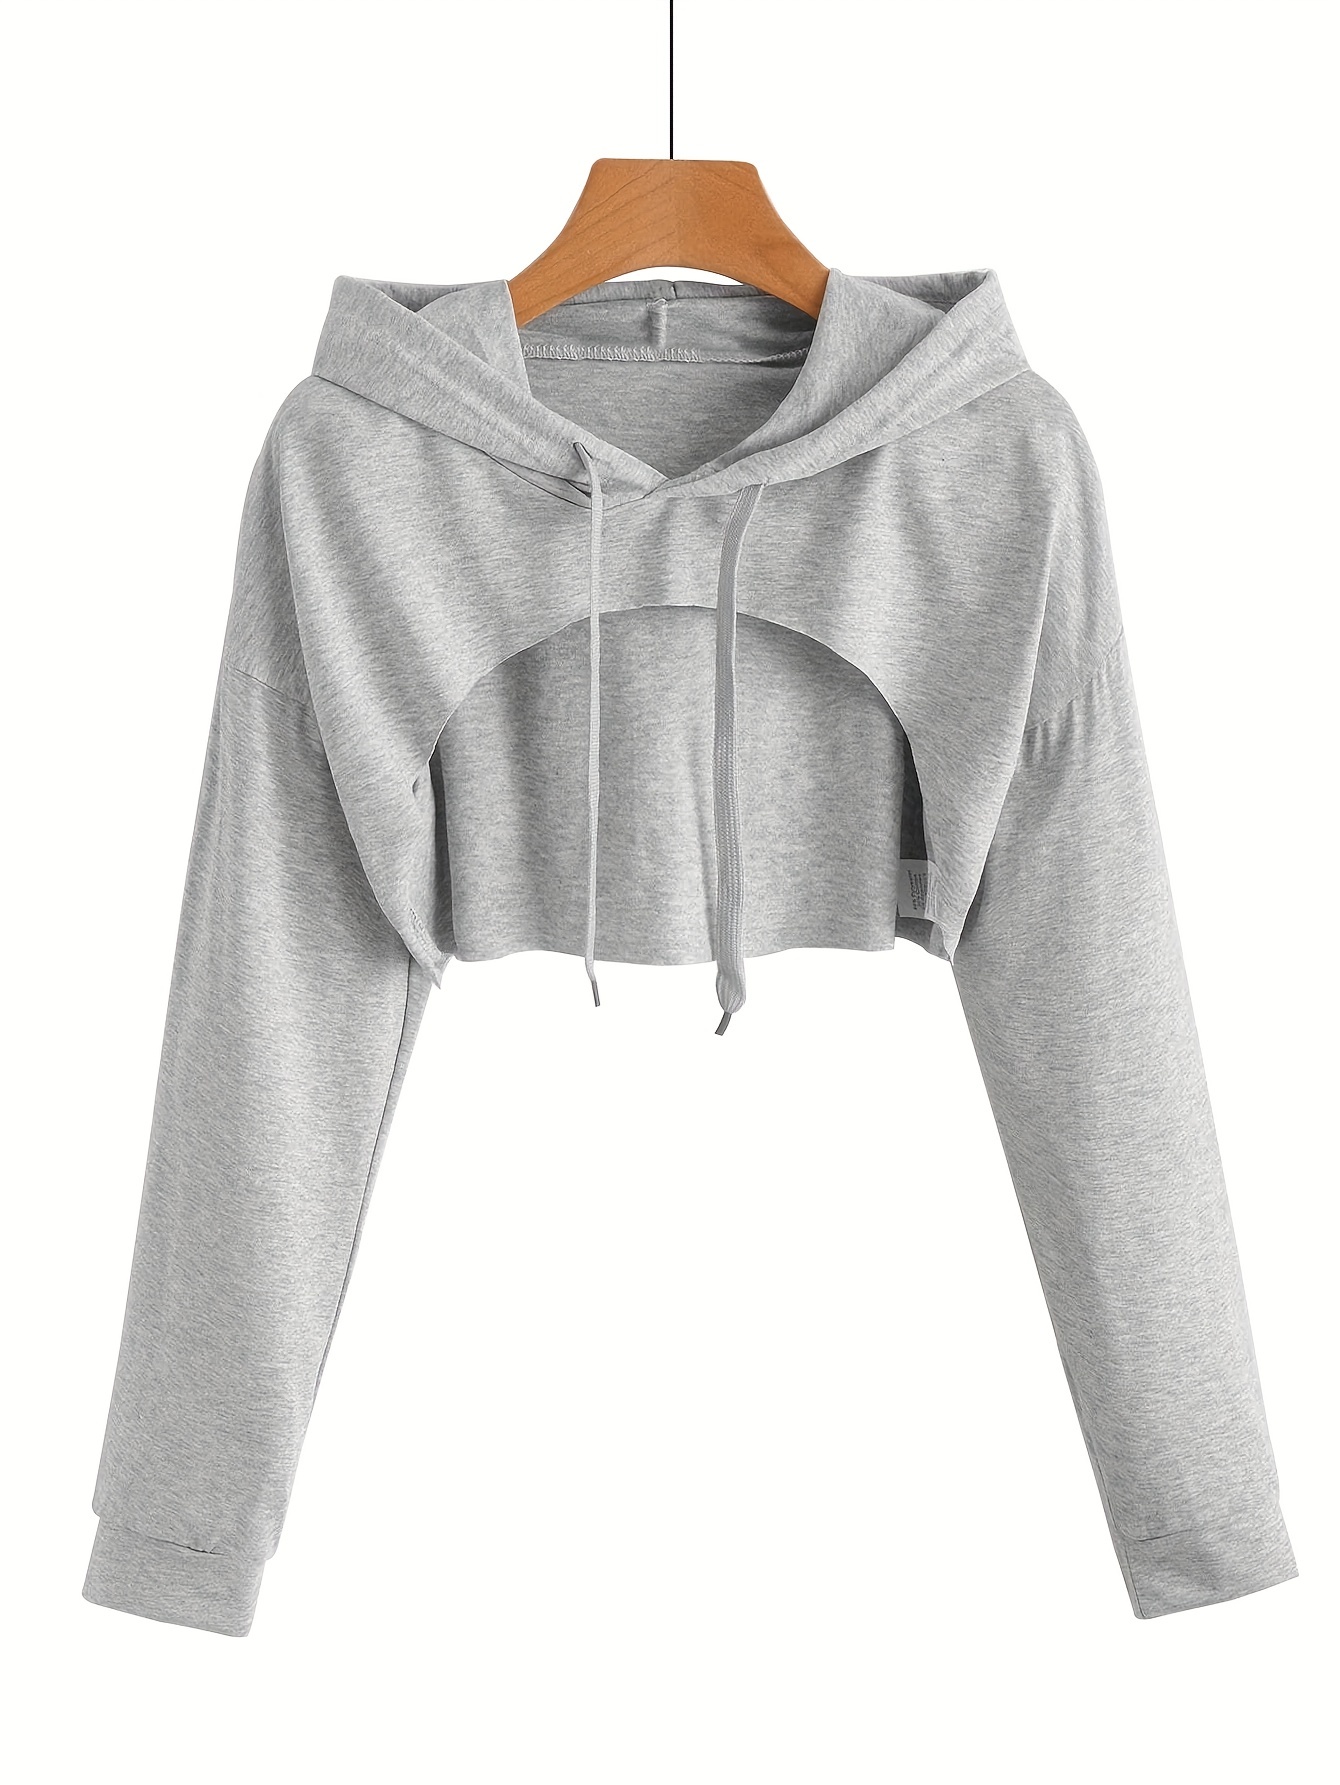 Cropped Sweatshirts for Women Long Sleeve Solid Color Drawstring Tops Crop  Tops Hoodie Pullover Fall Clothes Outfit